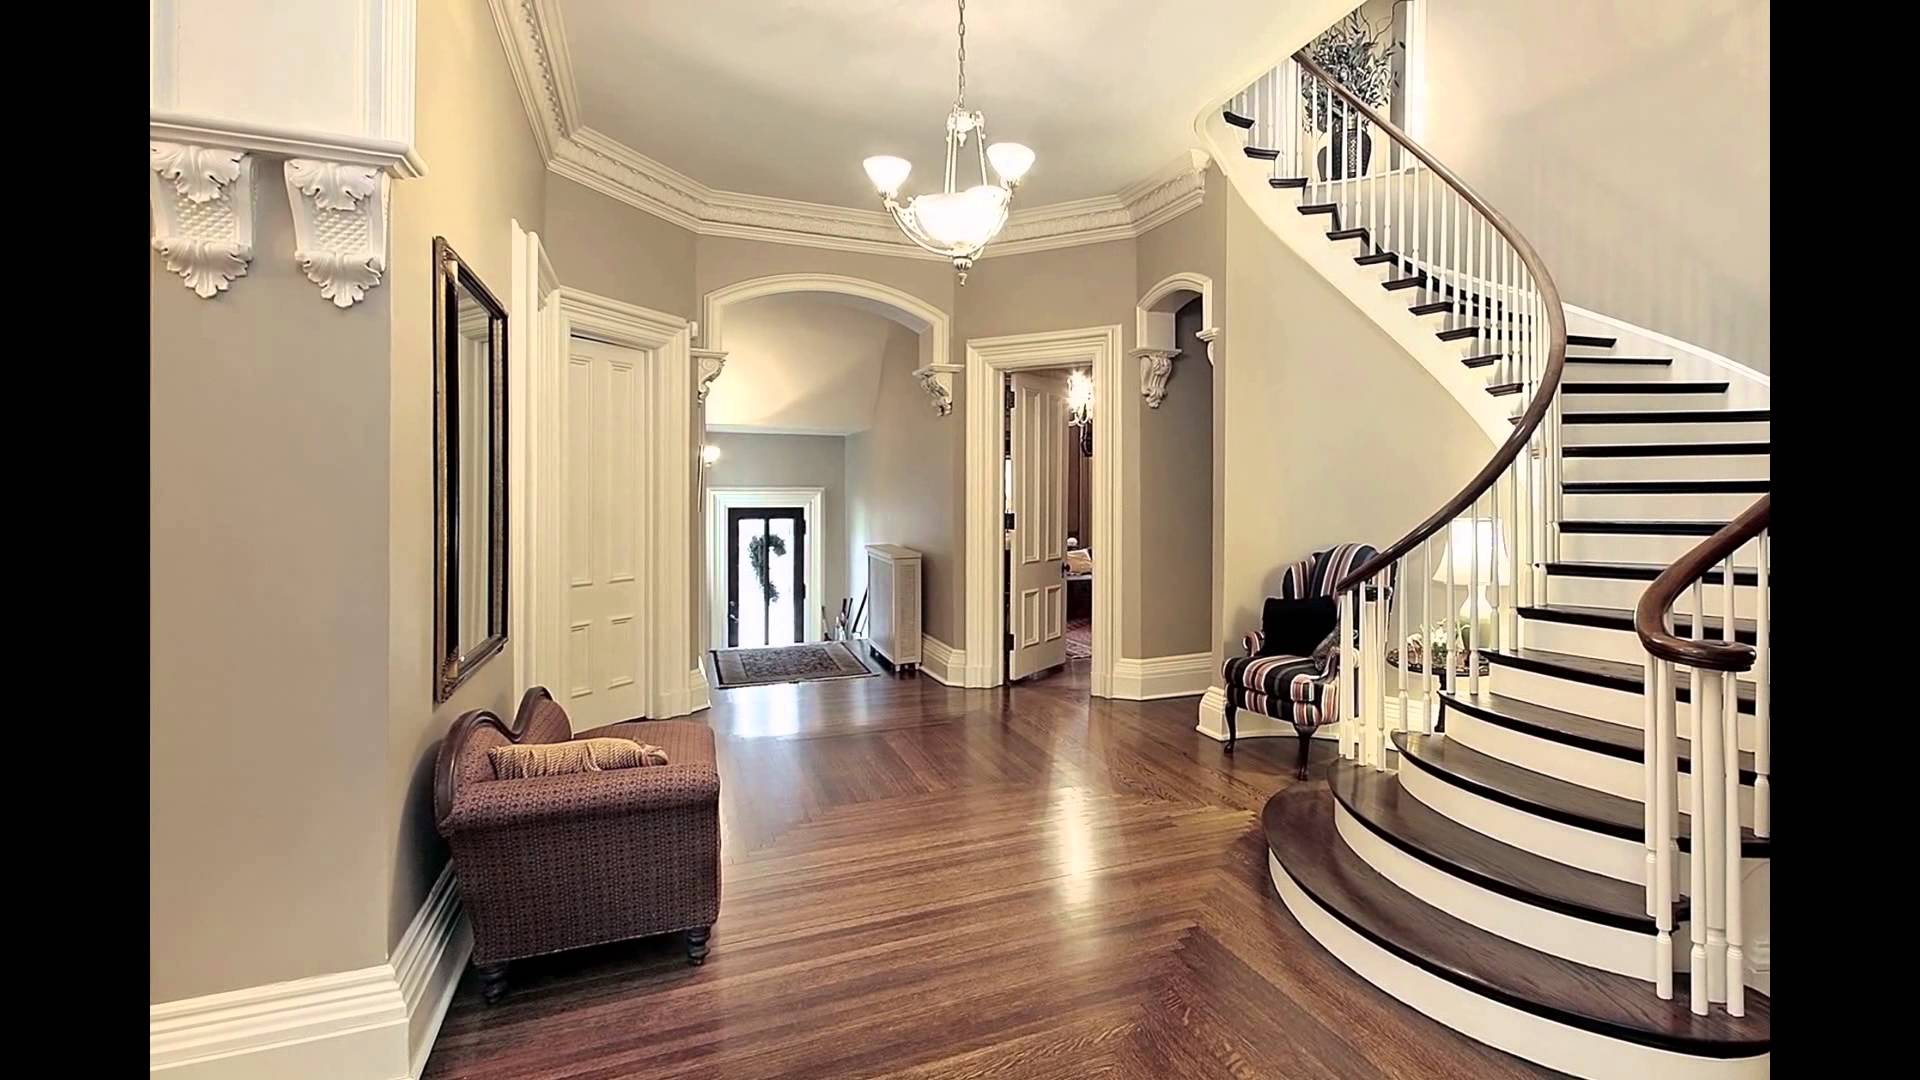 Home Entrance Foyer With Staircase - Foyer Interior Design Images ...